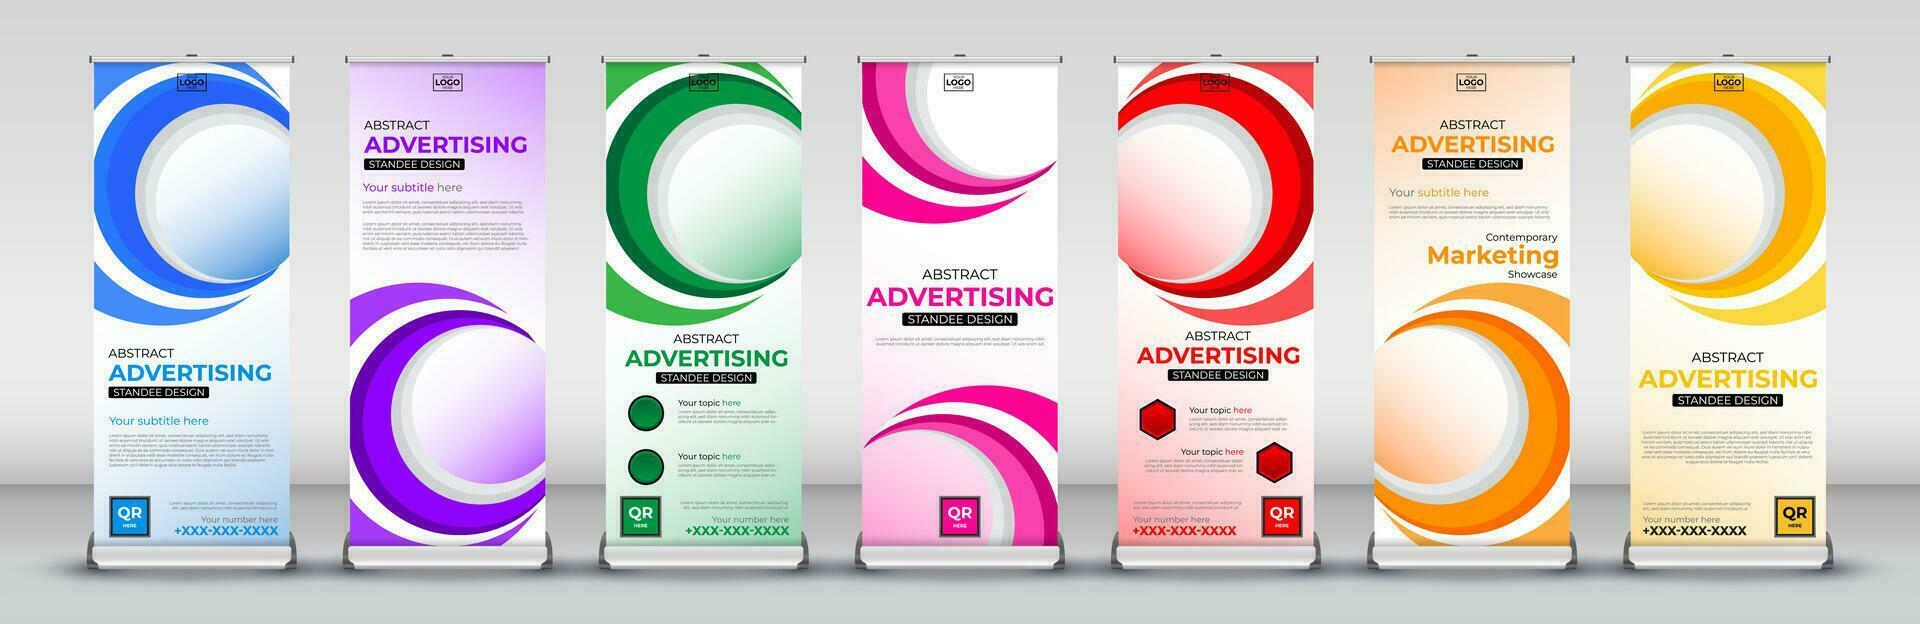 vertical roll up standee set for Street Business, events, presentations, meetings, annual events, exhibitions vector